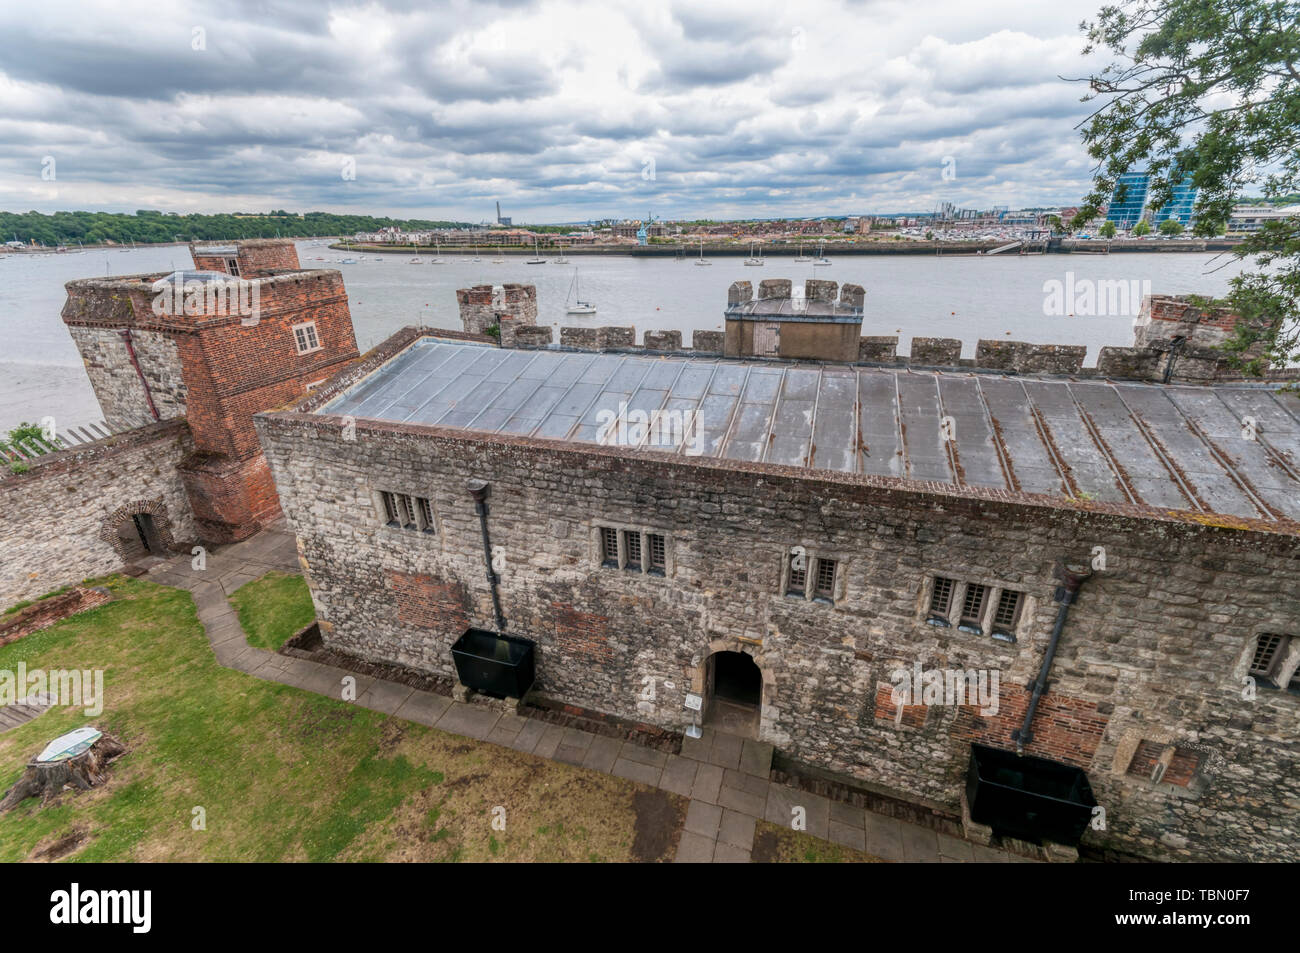 The Elizabethan Upnor Castle on the Hoo peninsula in north Kent with the River Medway and Chatham Quays in the background. Stock Photo